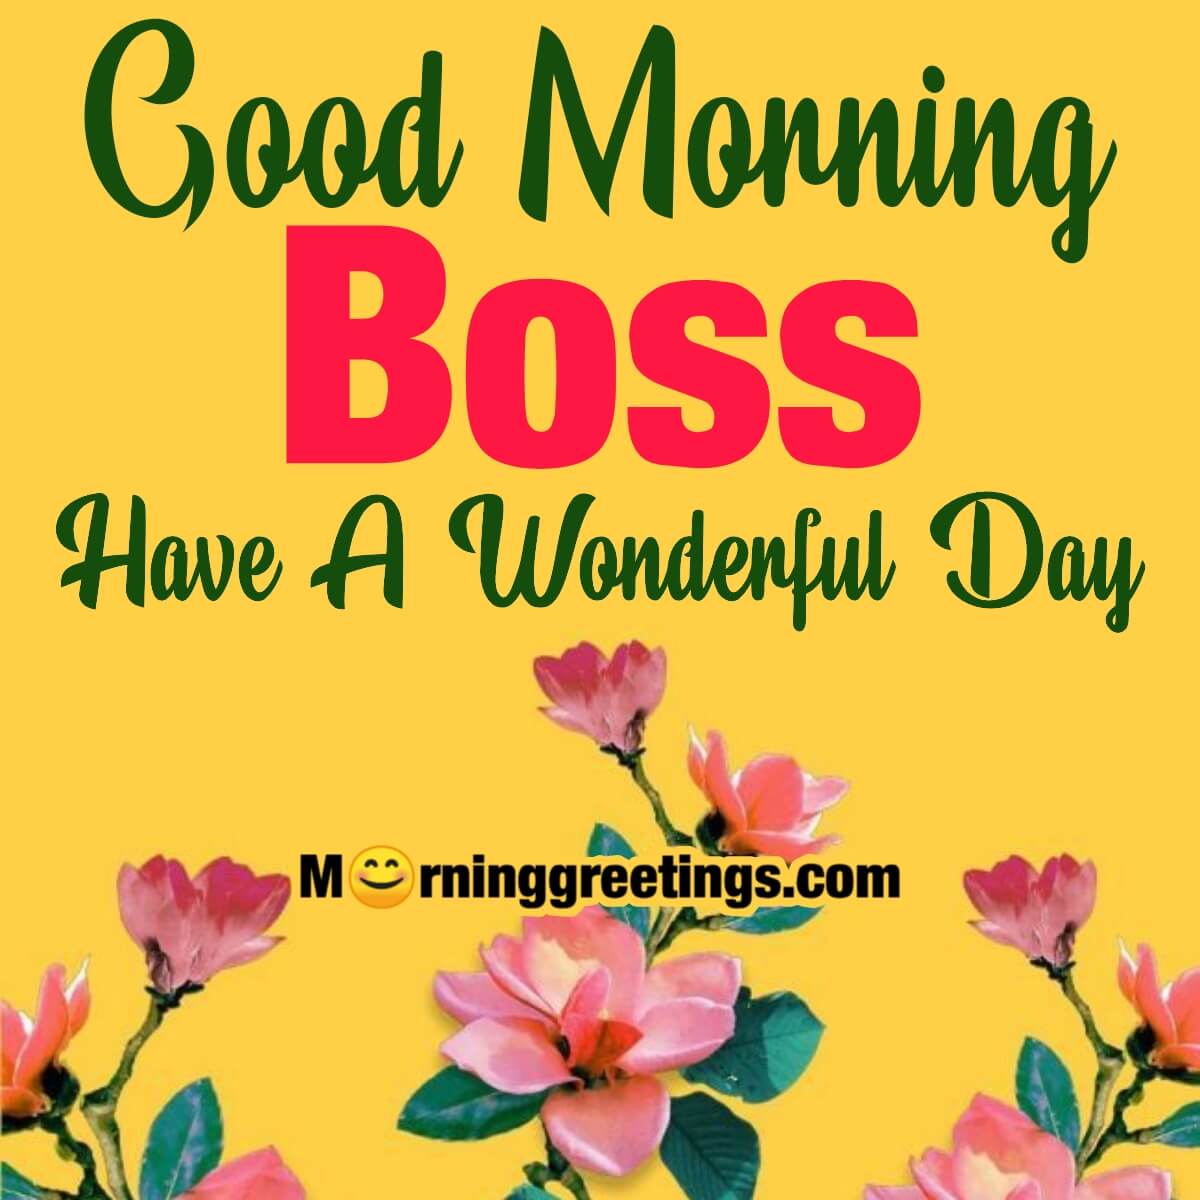 Good Morning Boss Have A Wonderful Day